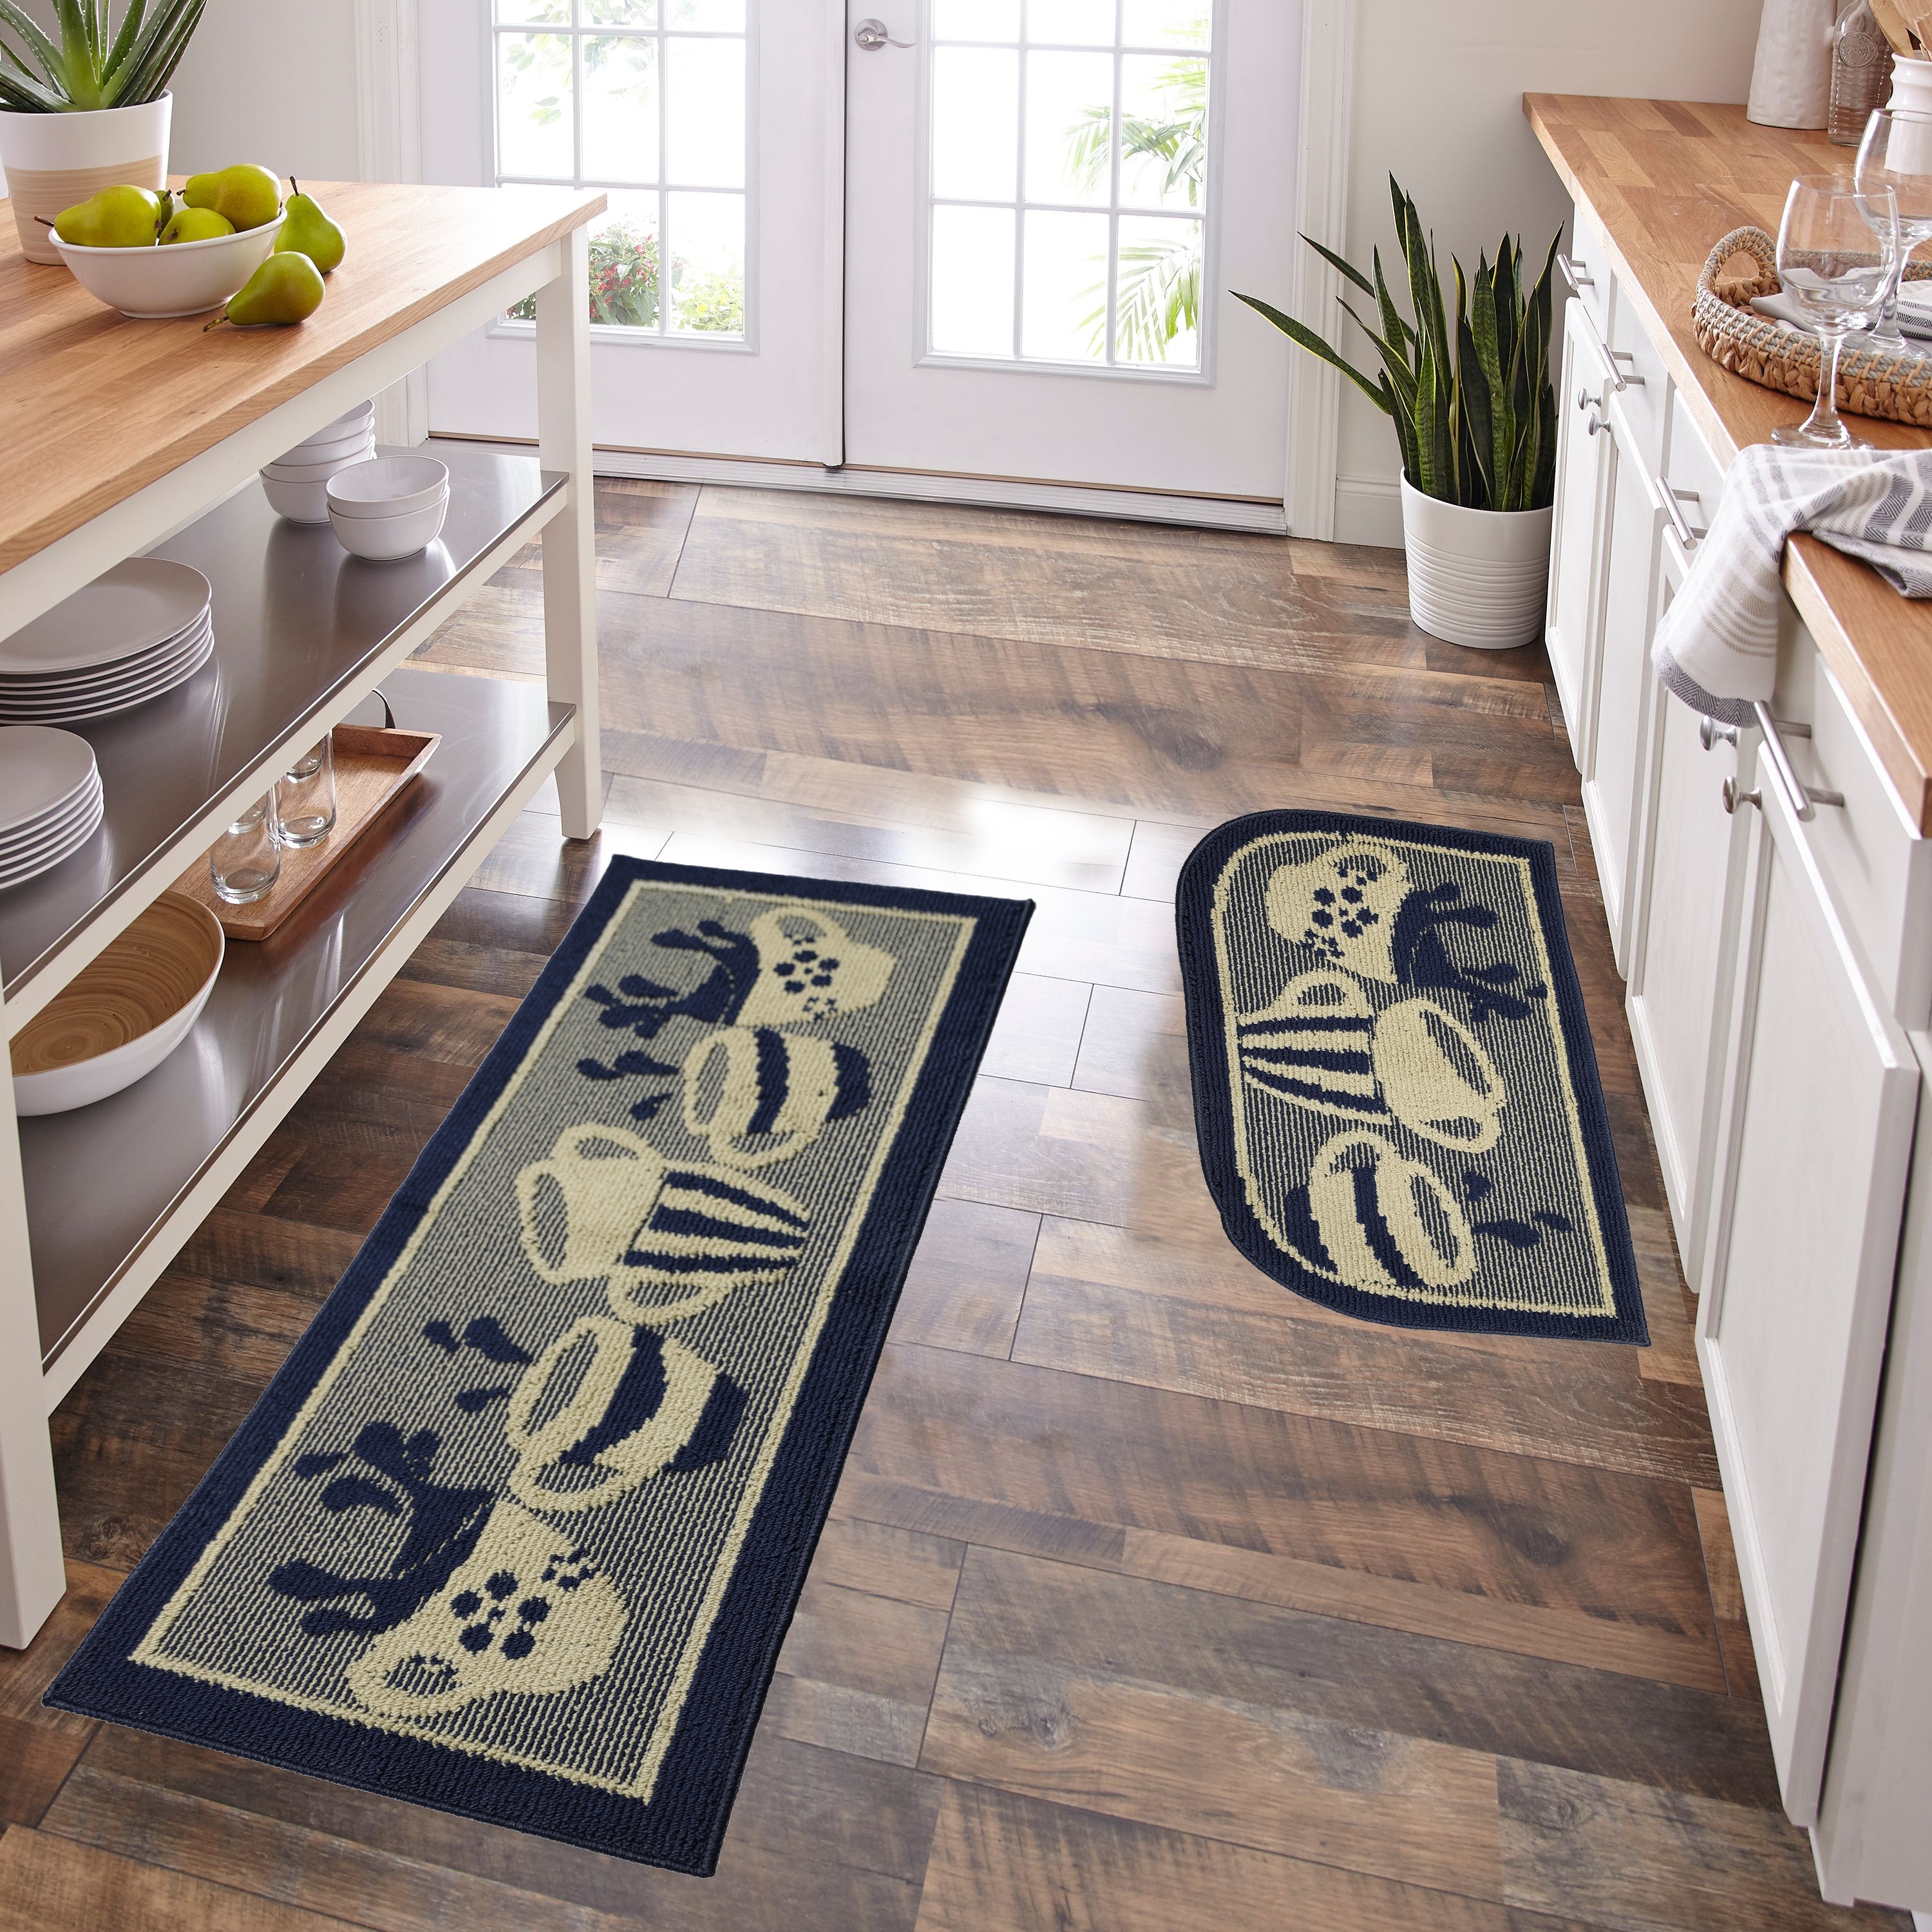 Super Absorbent Woven Kitchen Rugs And Mats, 100% Rubber Backing